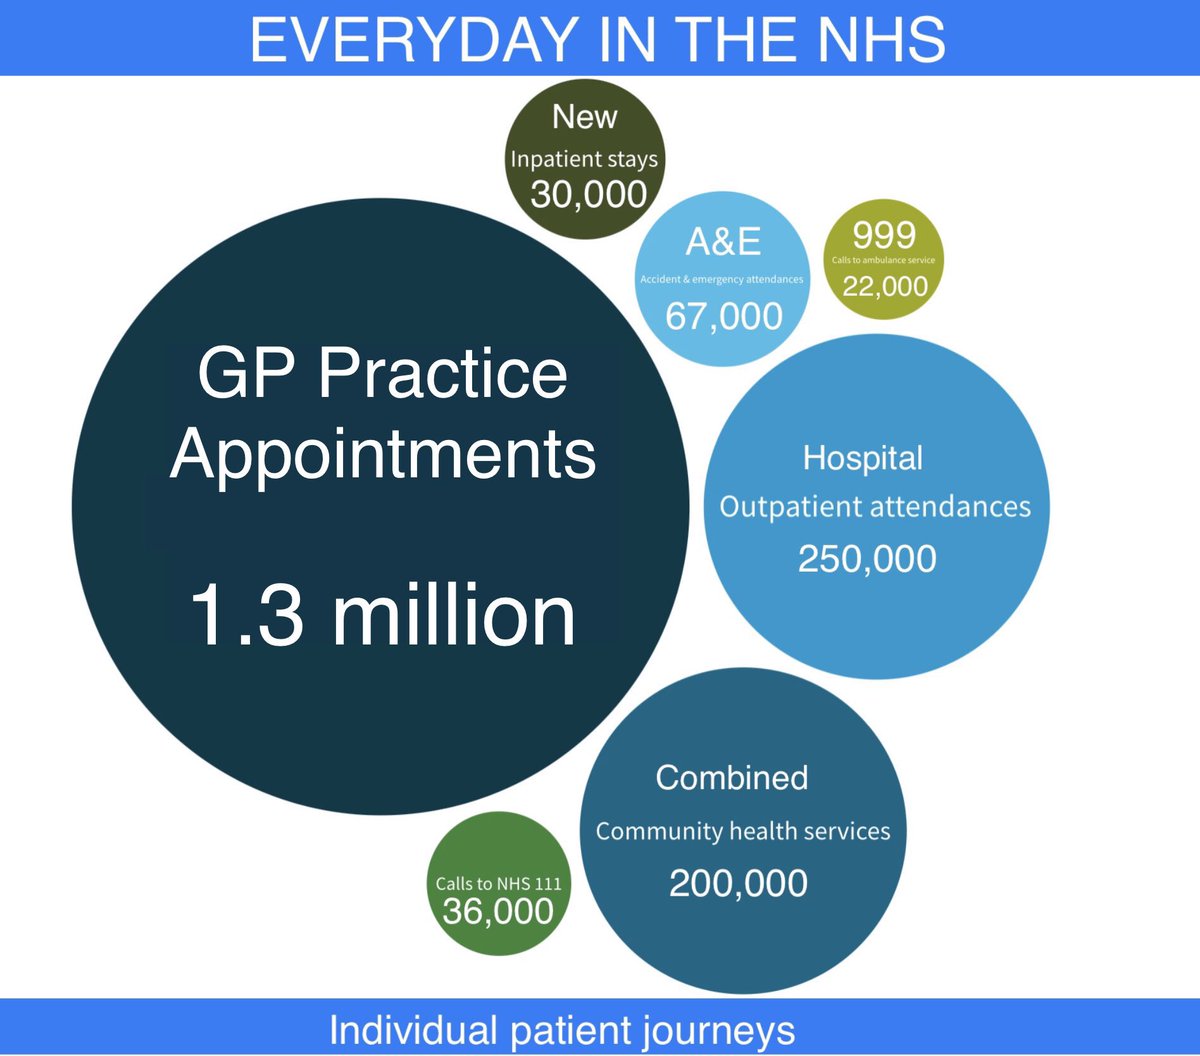 From @DrSteveTaylor adapted from @TheKingsFund data 21/22 Our #generalpractice teams together with #communityservices have so much to be proud of each & every day. ⬇️ Would love to see community and general practice recognised for their huge contribution to health & care.